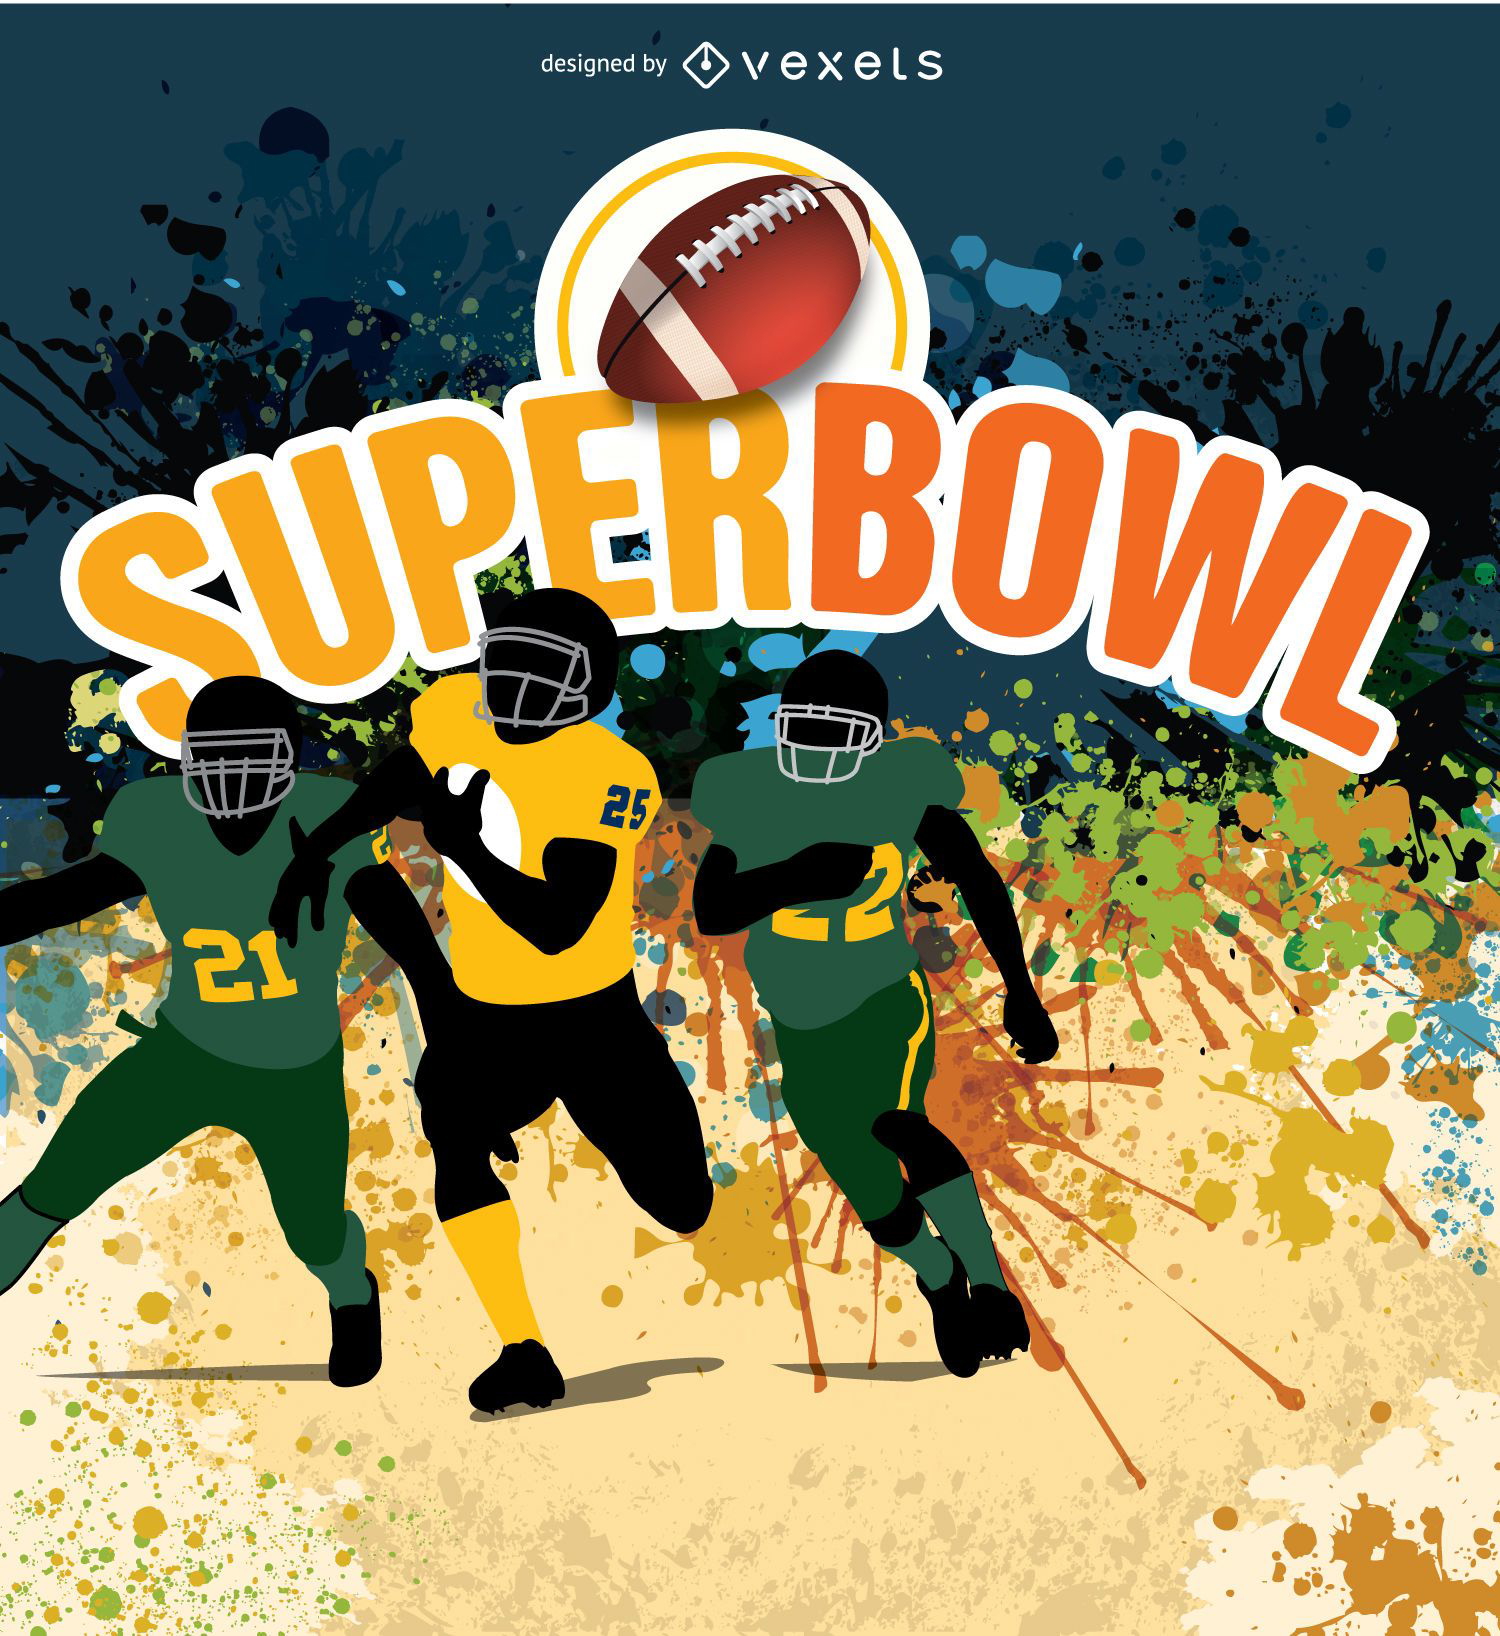 Super Bow American Football players